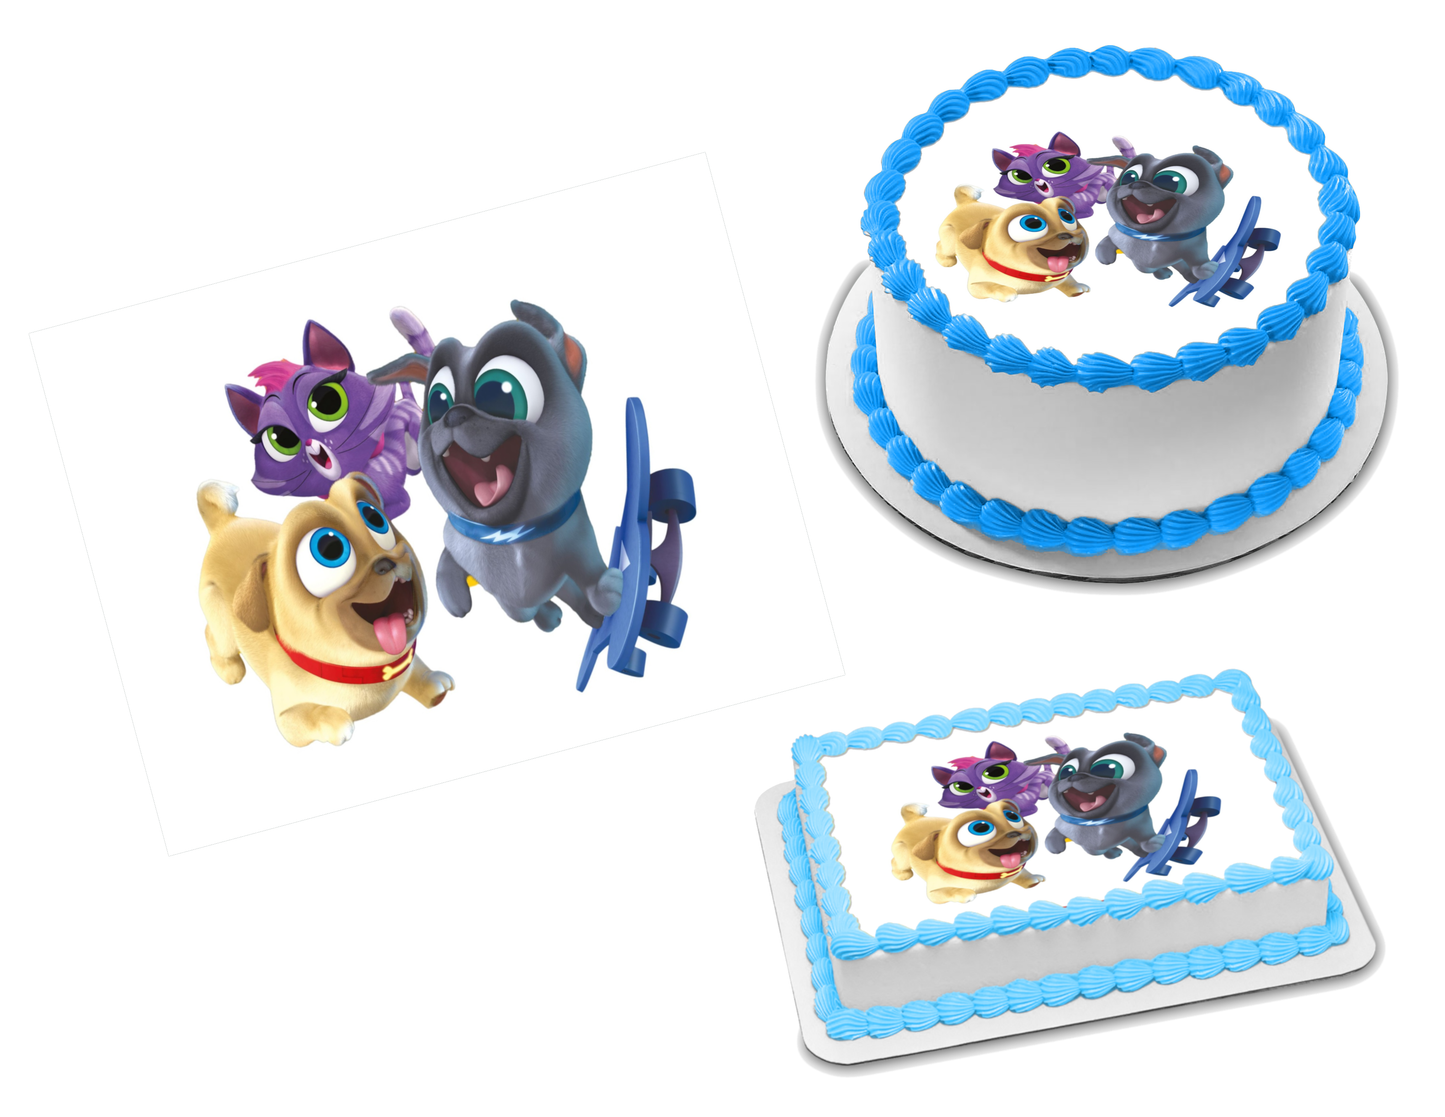 Puppy Dog Pals Edible Image Frosting Sheet #4 (70+ sizes)